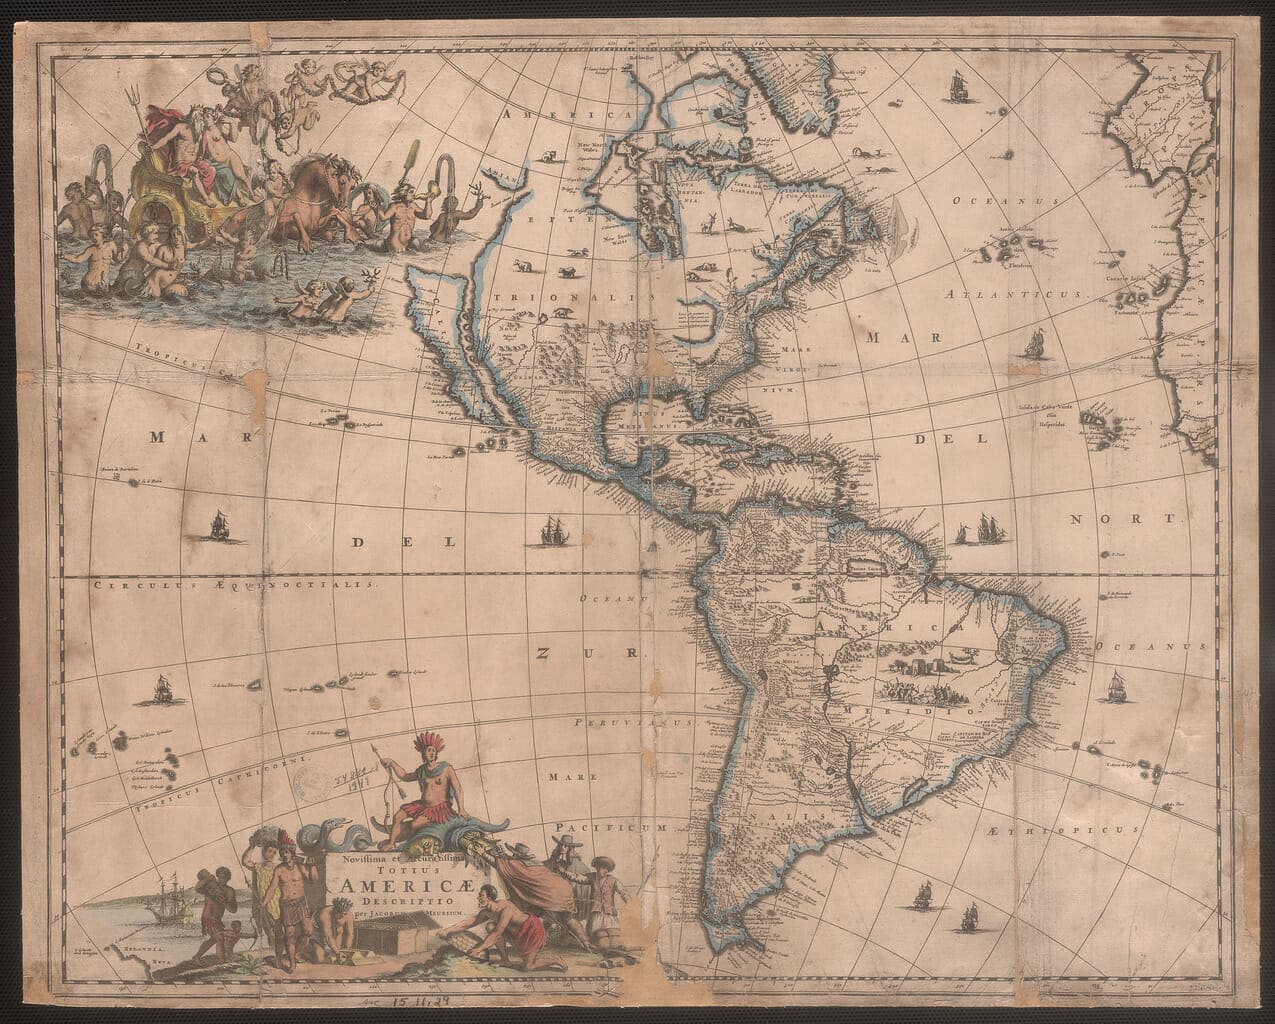 Emancipating a Continent: Studying the Americas Through The Region’s Liberators